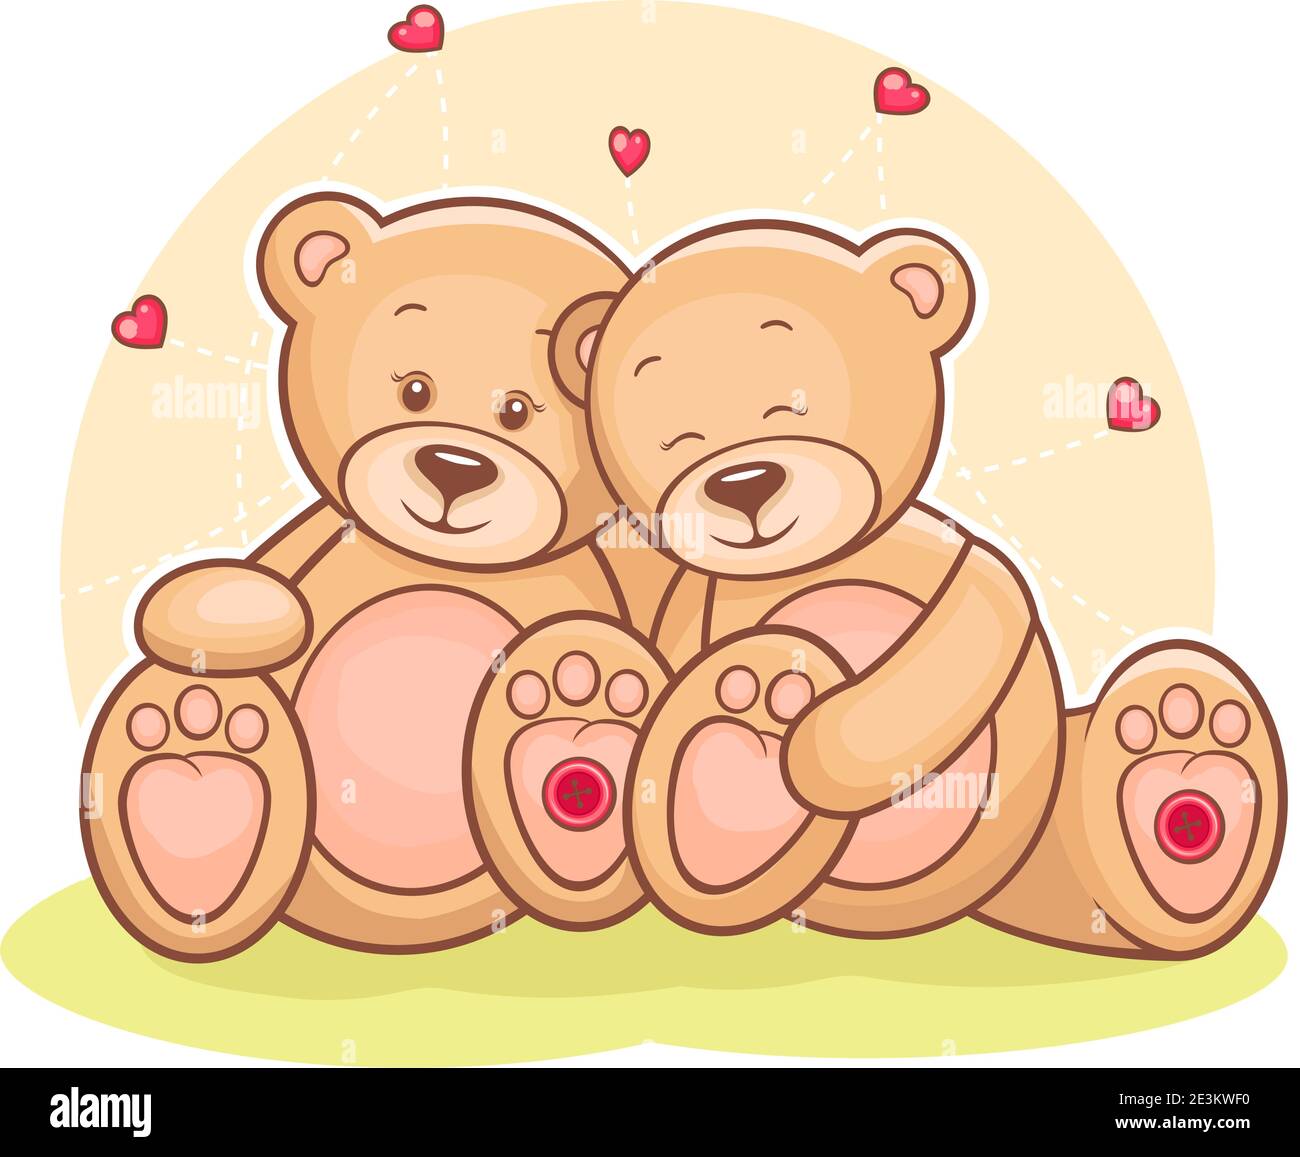 Illustration of loving couple Teddy Bears with hearts. Stock Vector